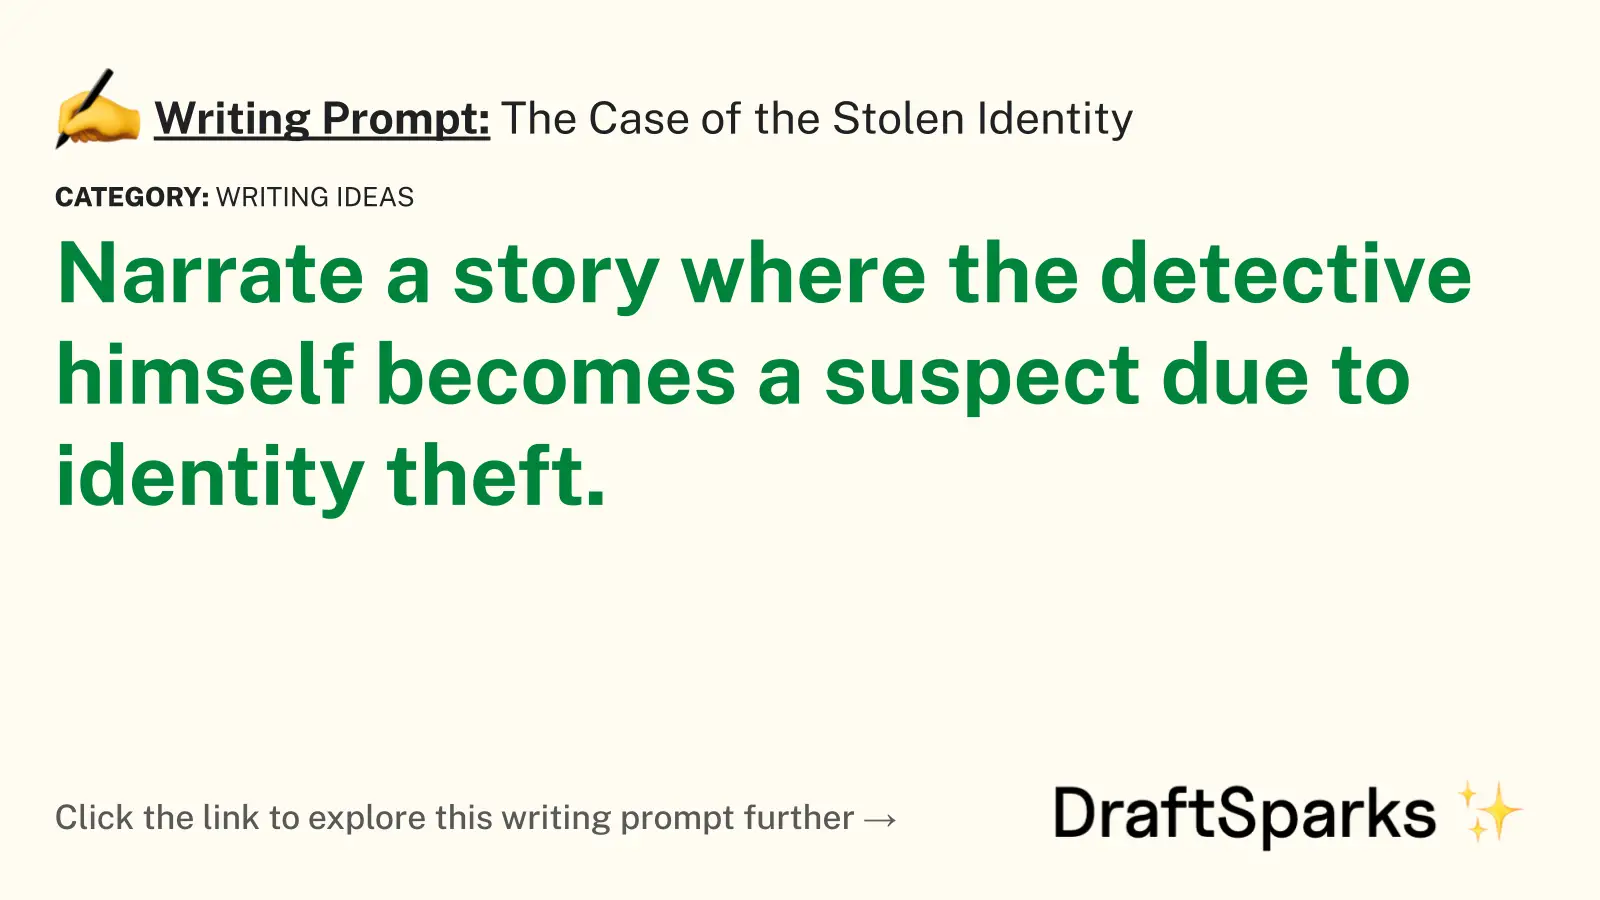 The Case of the Stolen Identity